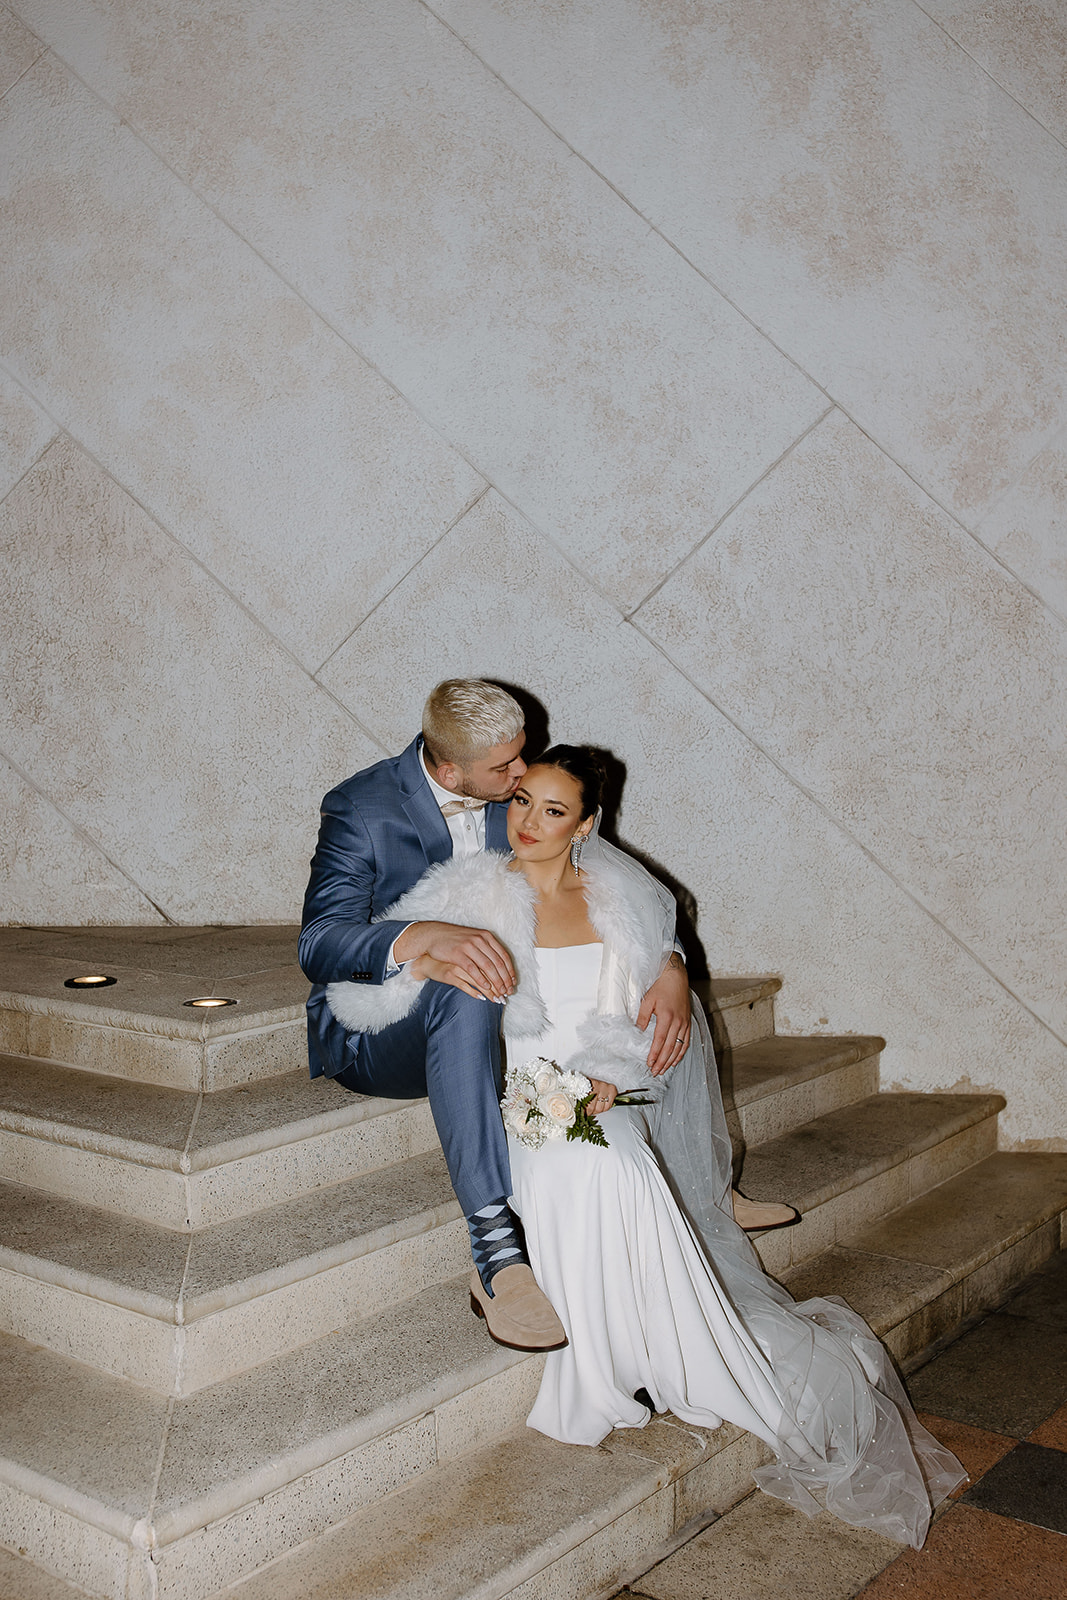 Bride and groom sit on a staircase